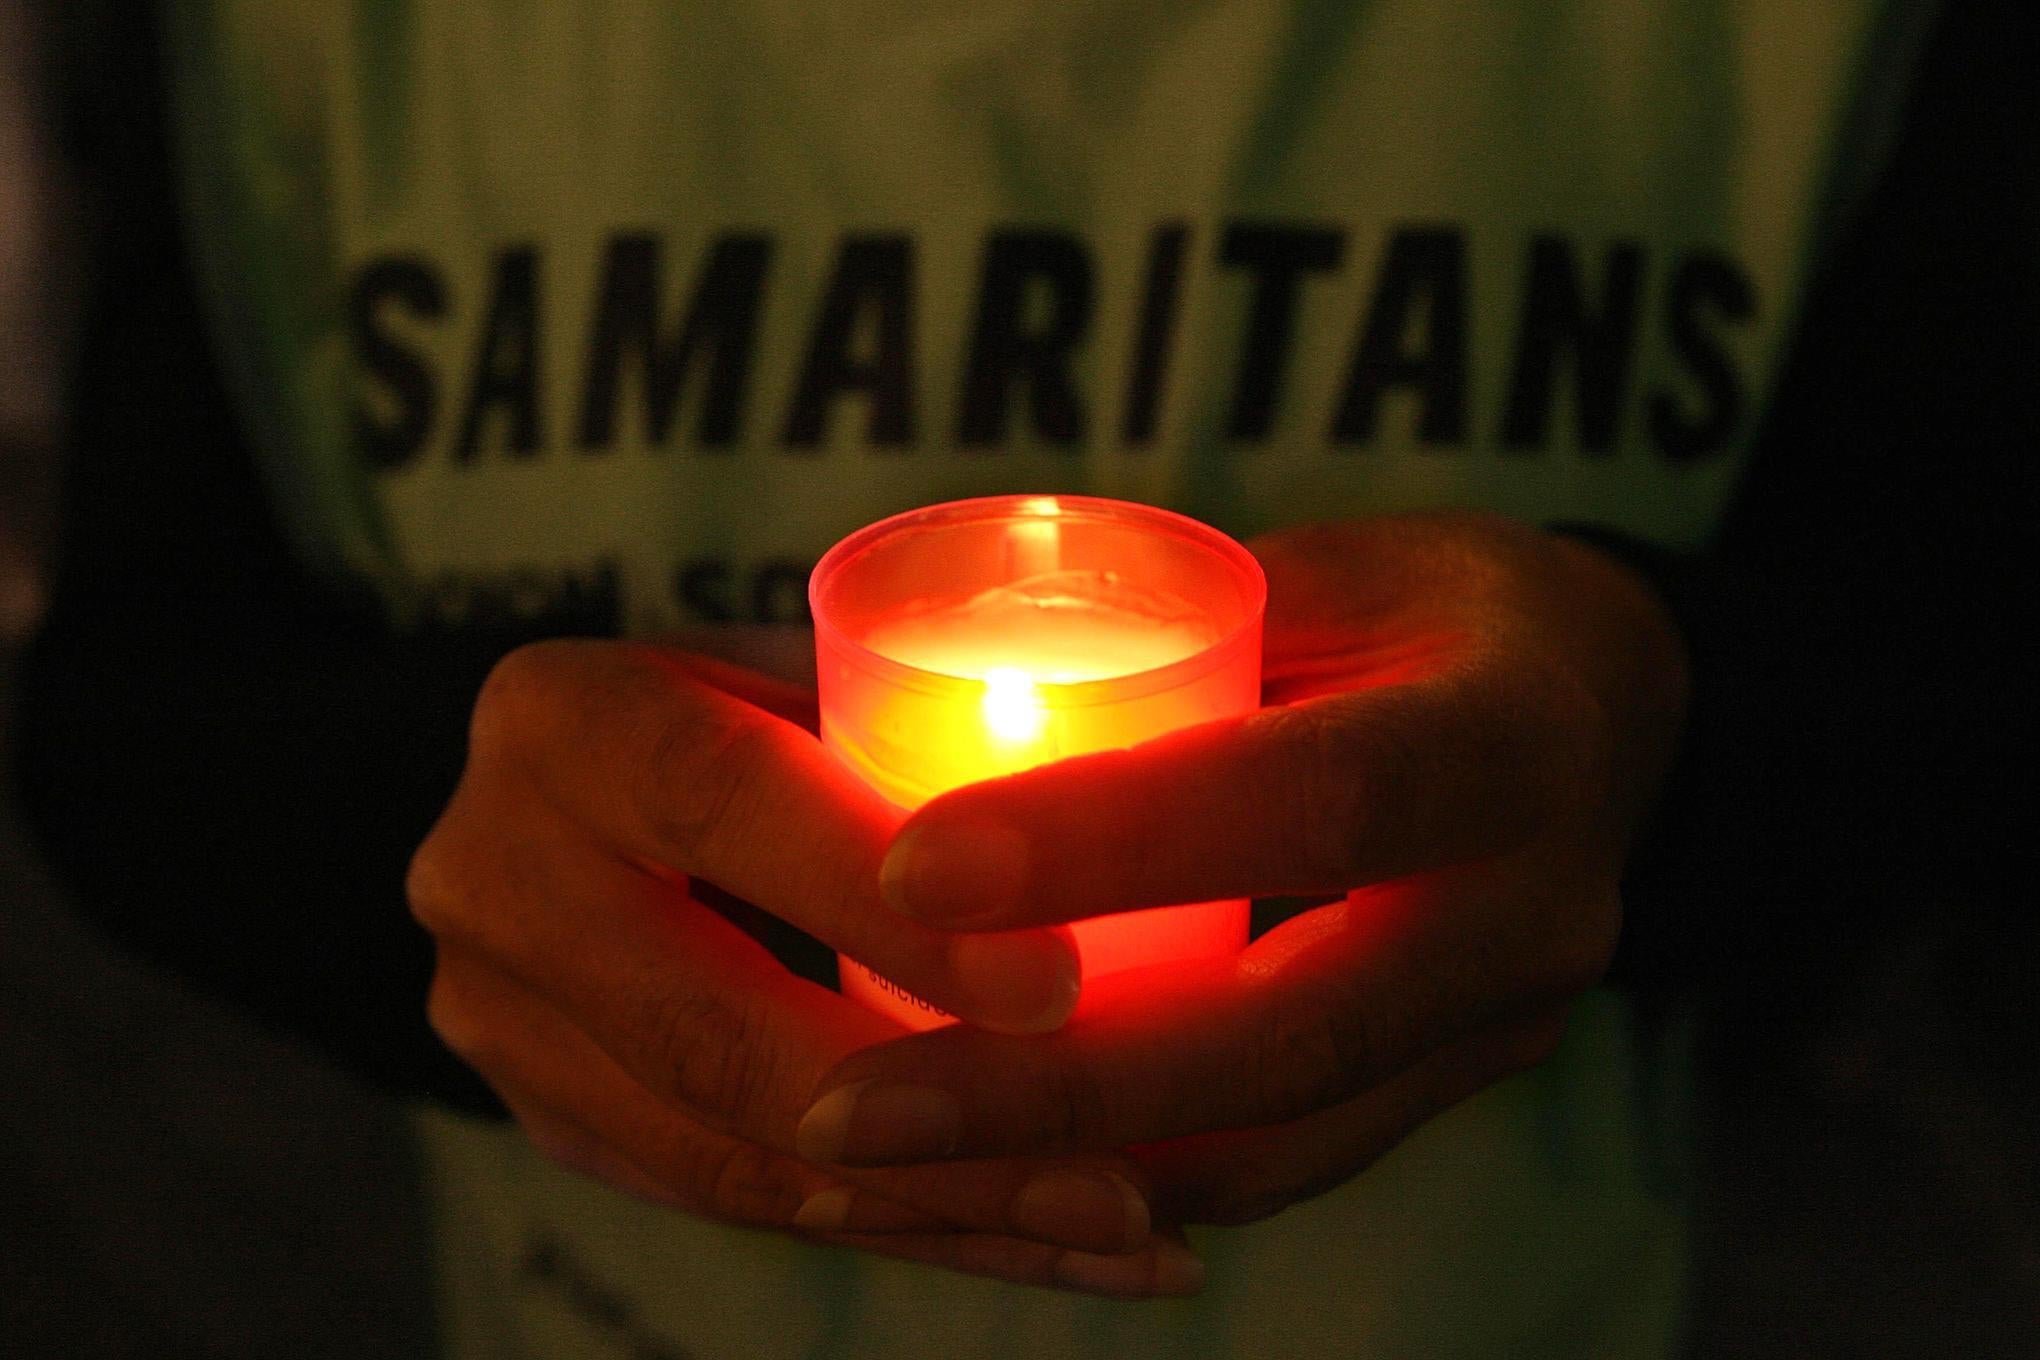 A Samaritans volunteer holds a candle during a vigil to mark World Suicide Prevention Day